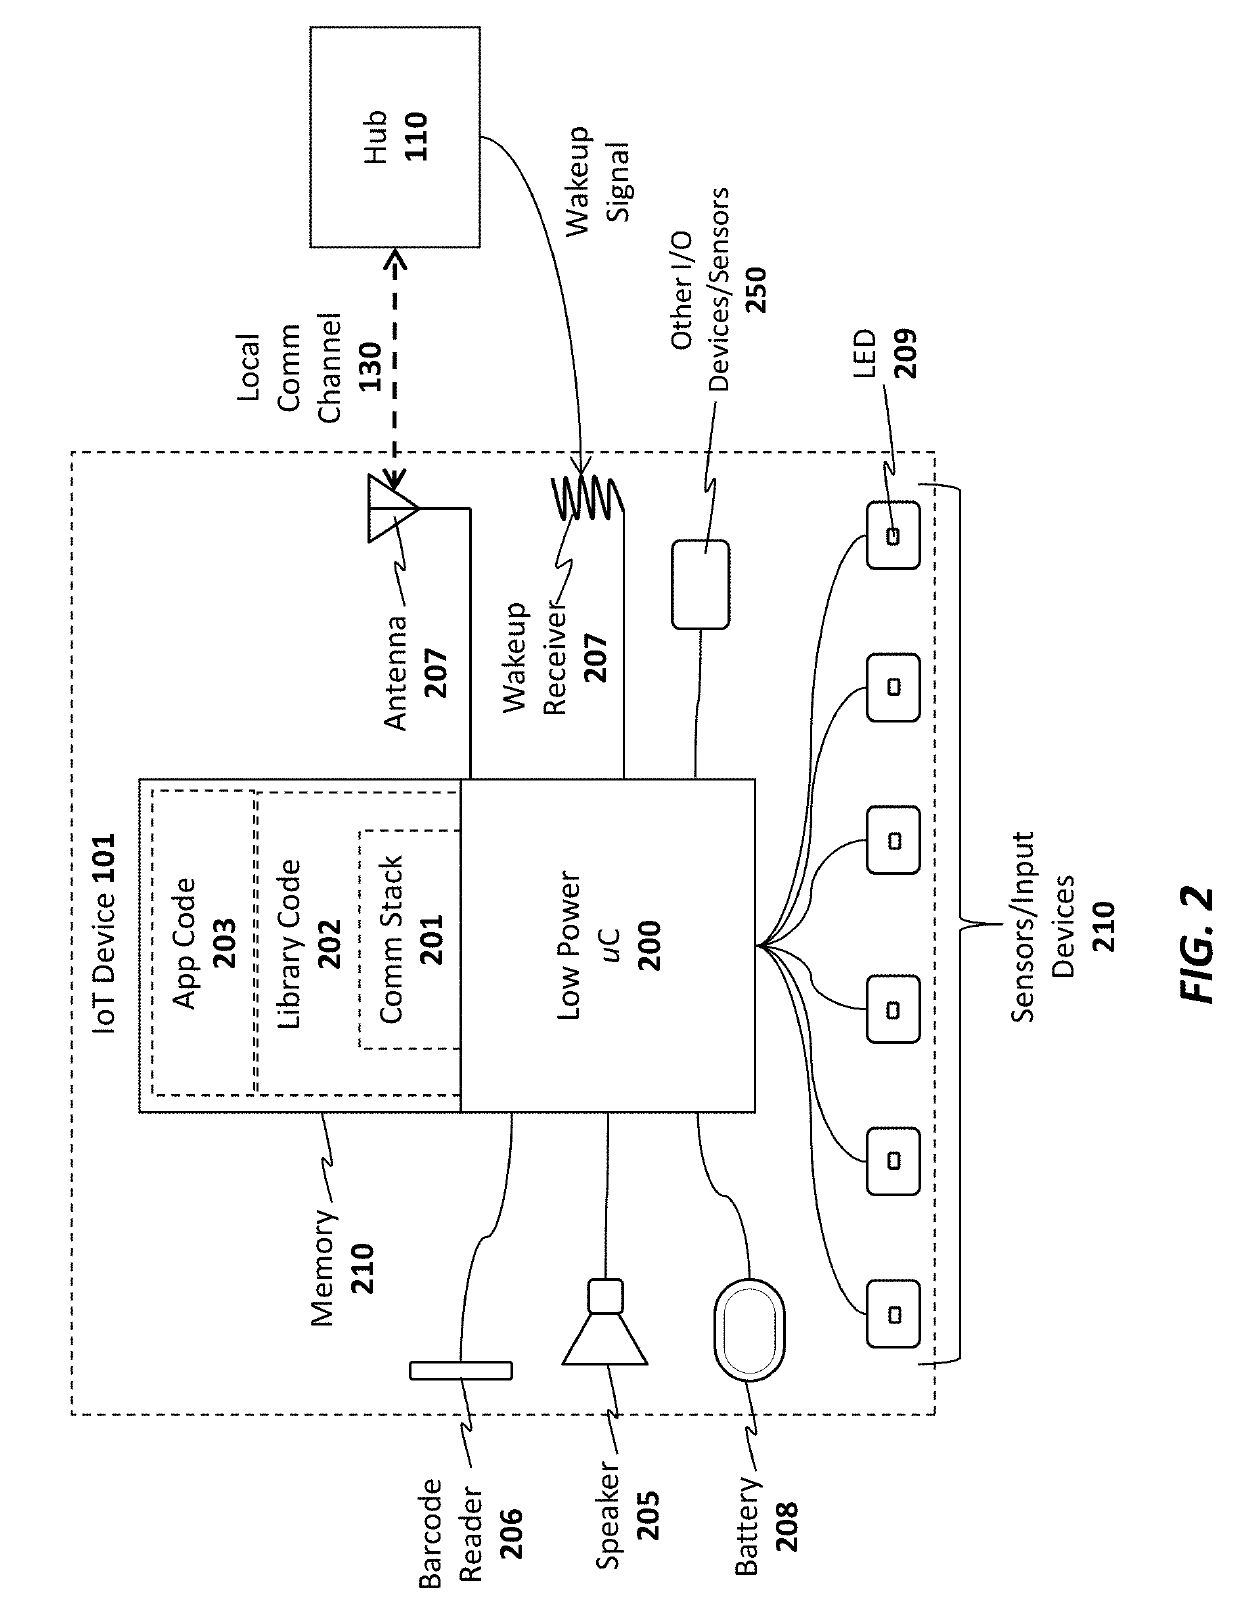 Apparatus and method for internet of things (IOT) security lock and notification device